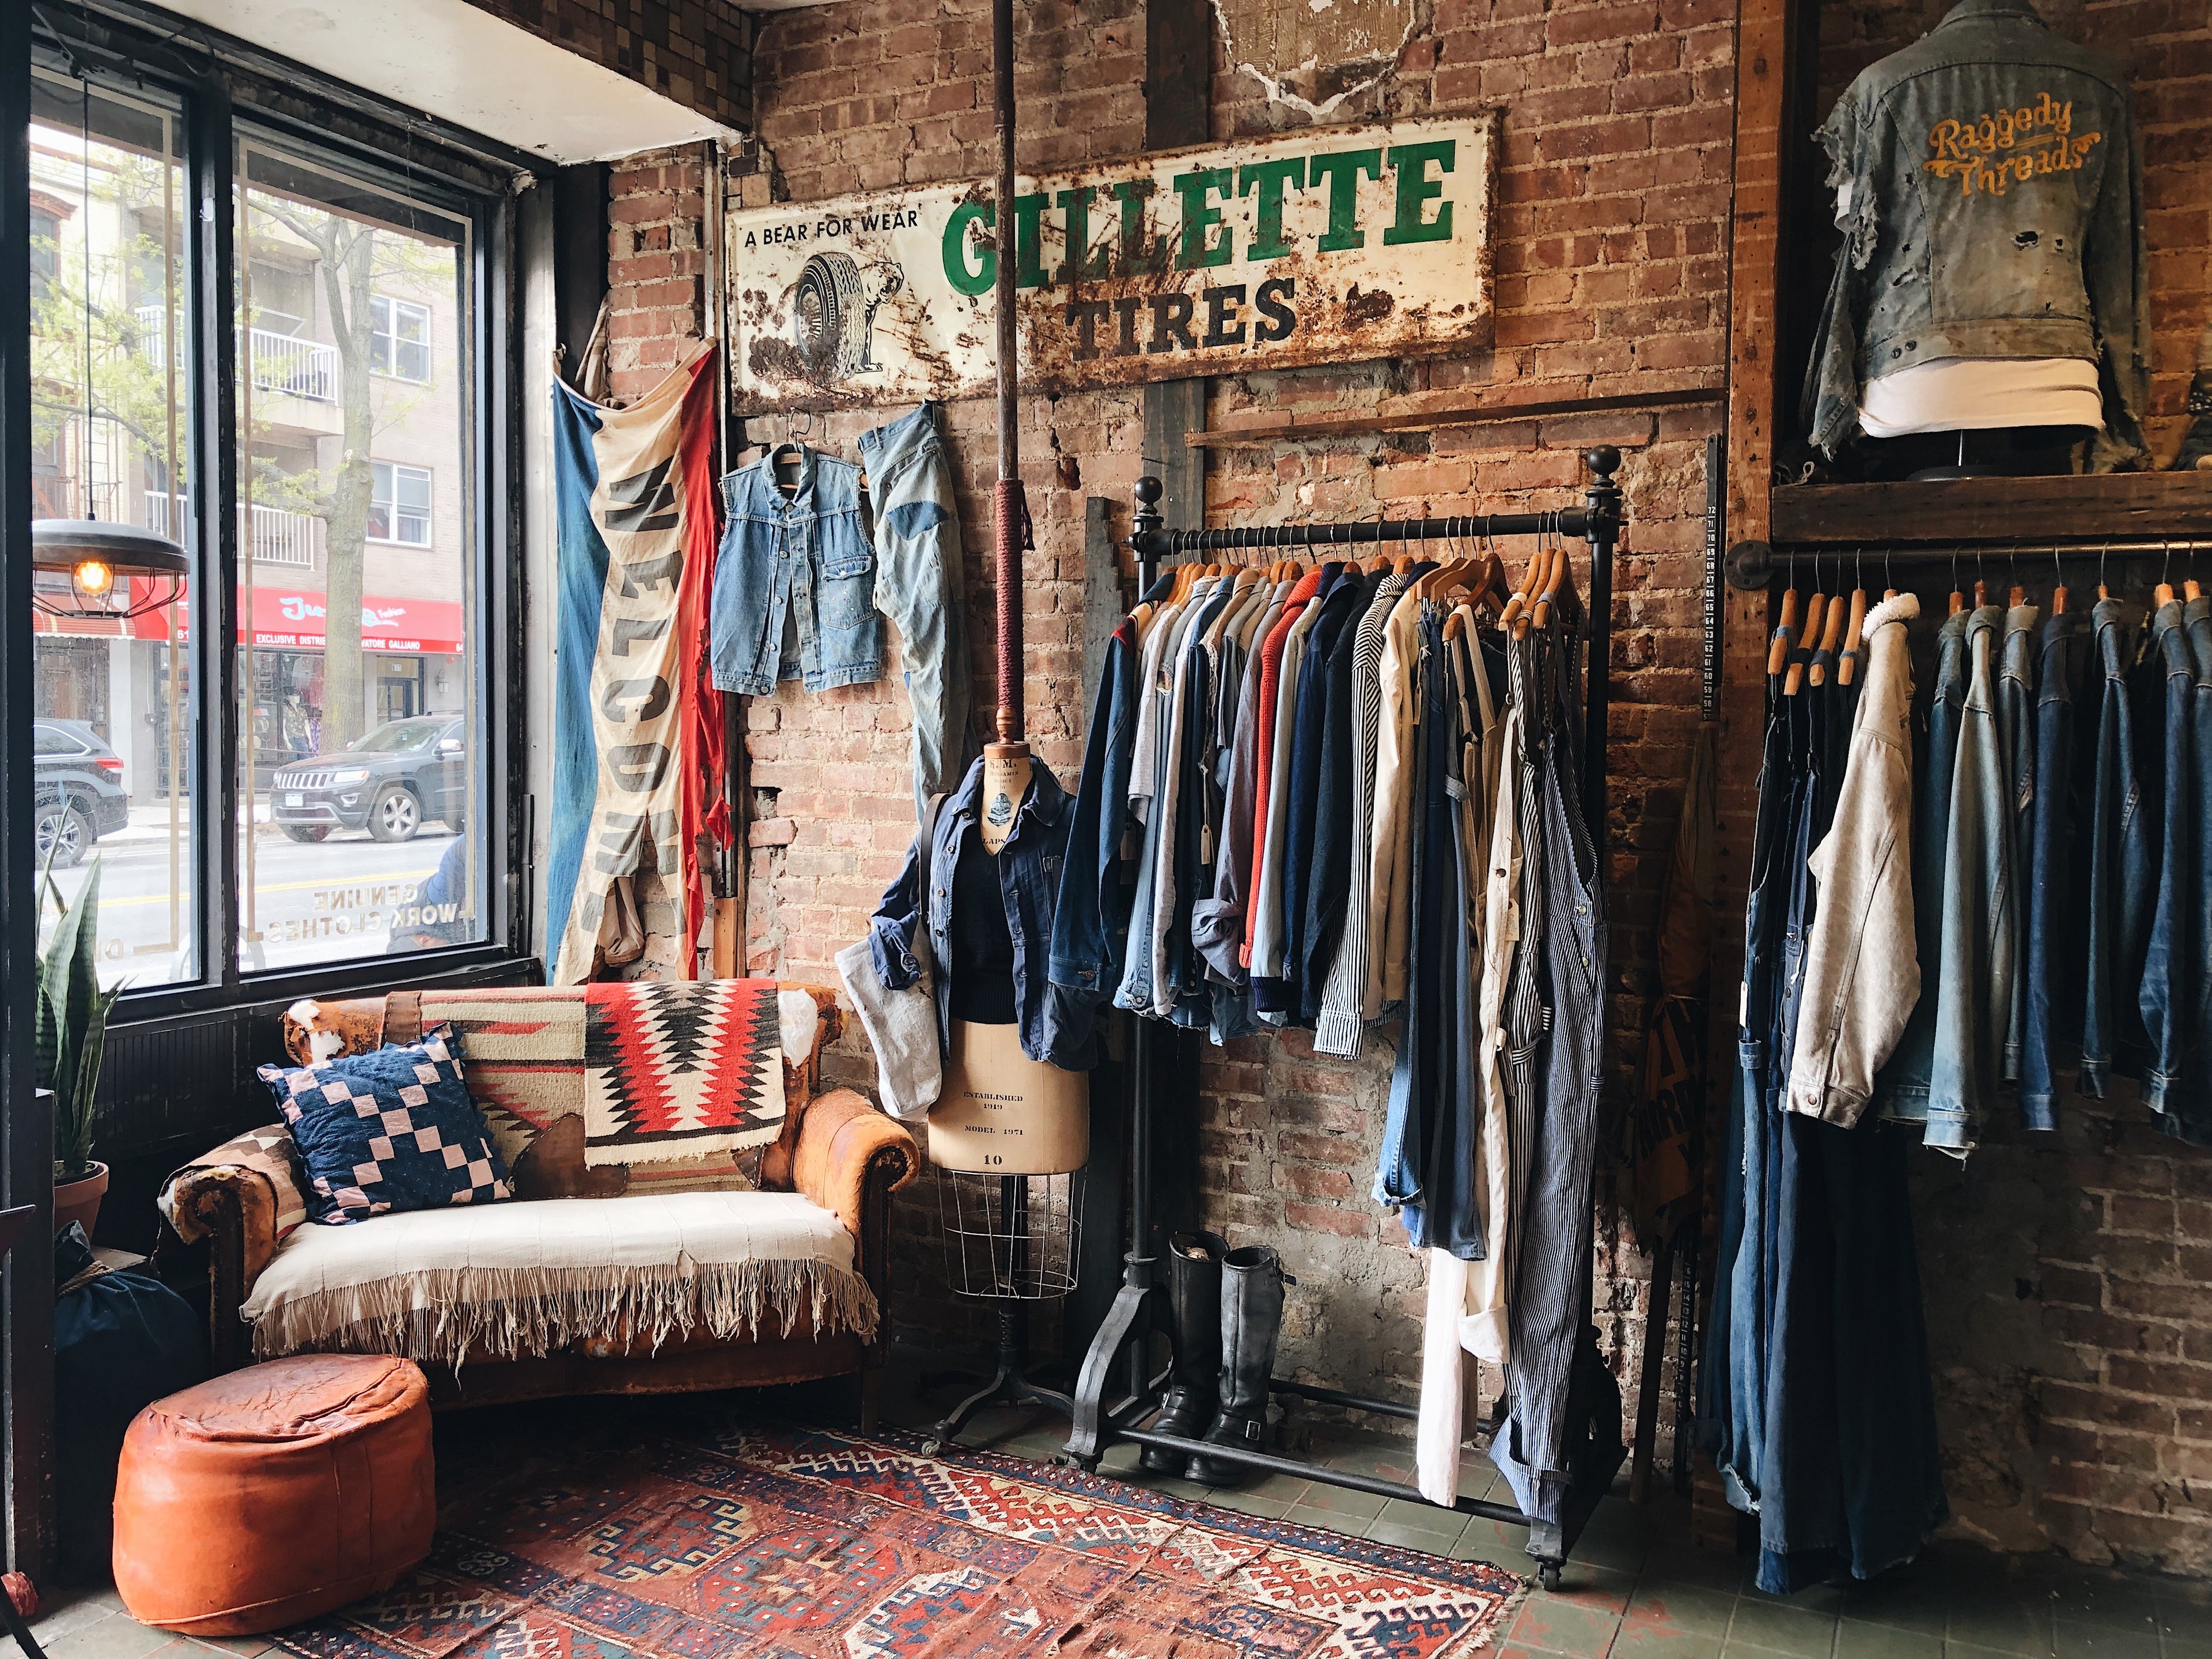 Front view of store with clothing racks of vintage denim and overalls